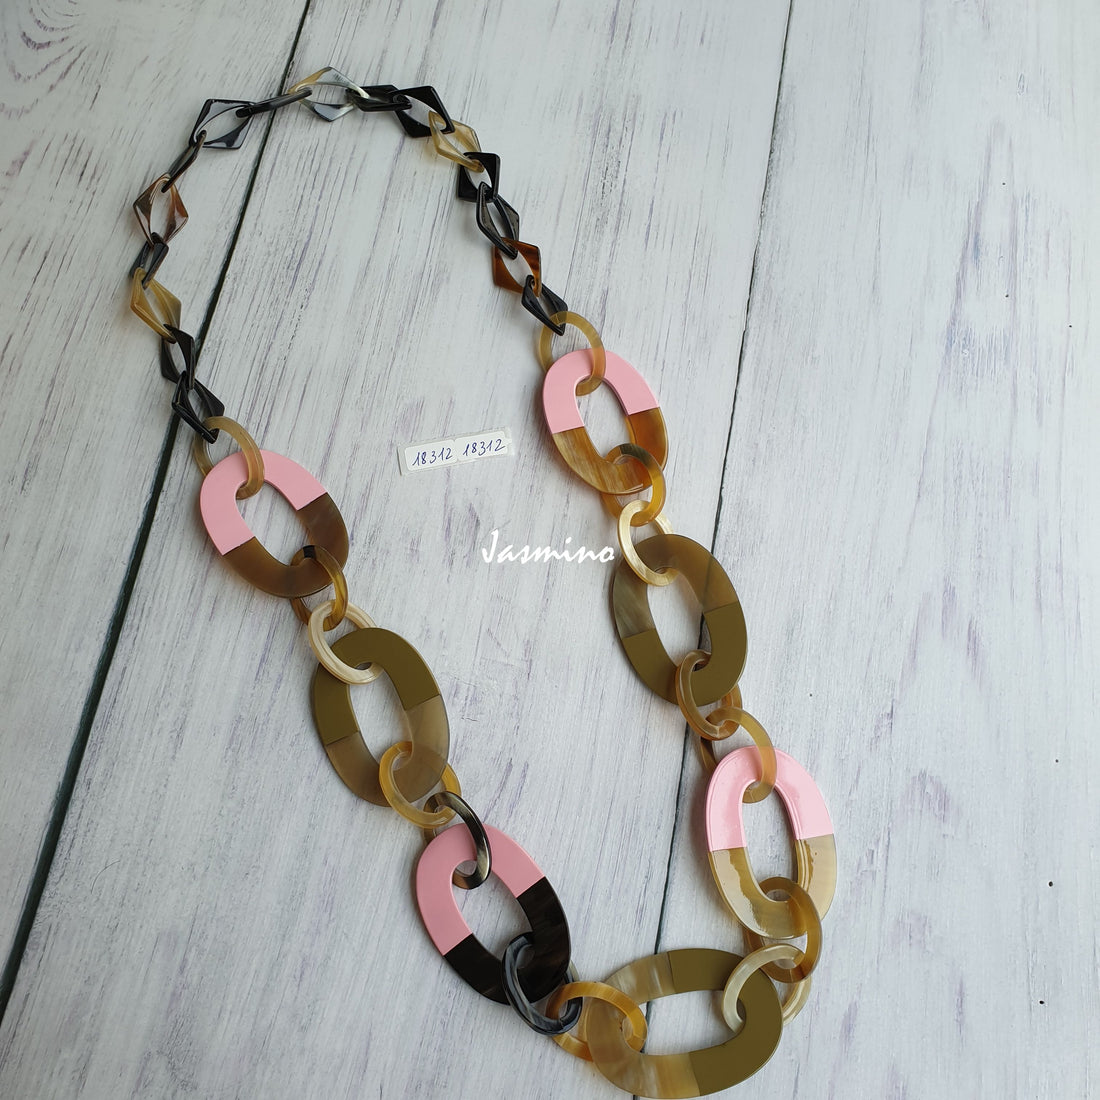 A handmade wide chain necklace features a mix of brown, black, and pink color on a white floor